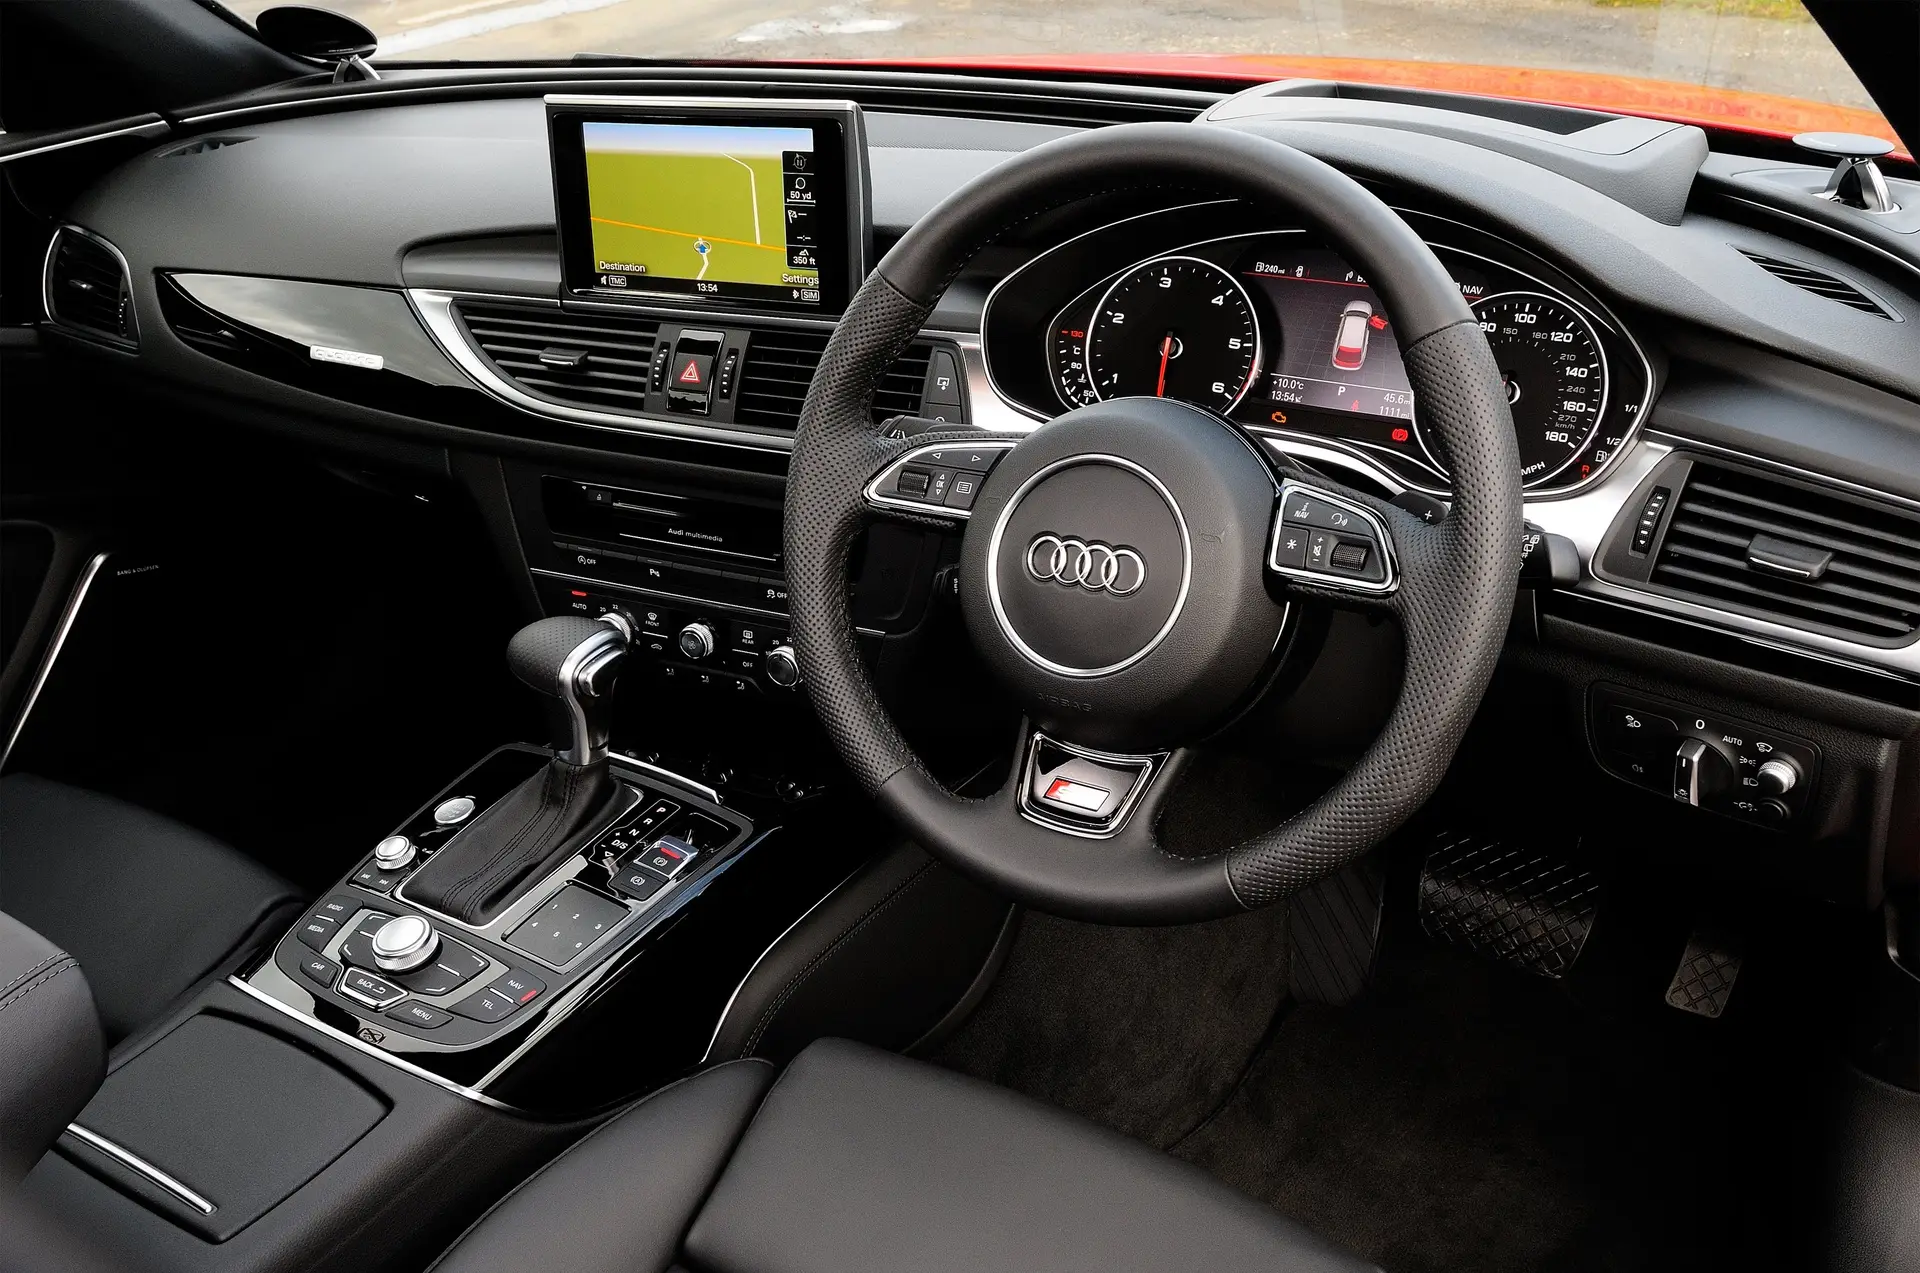 Used Audi A6 (2011-2018) Review: Interior close up photo of the Audi A6 dashboard 